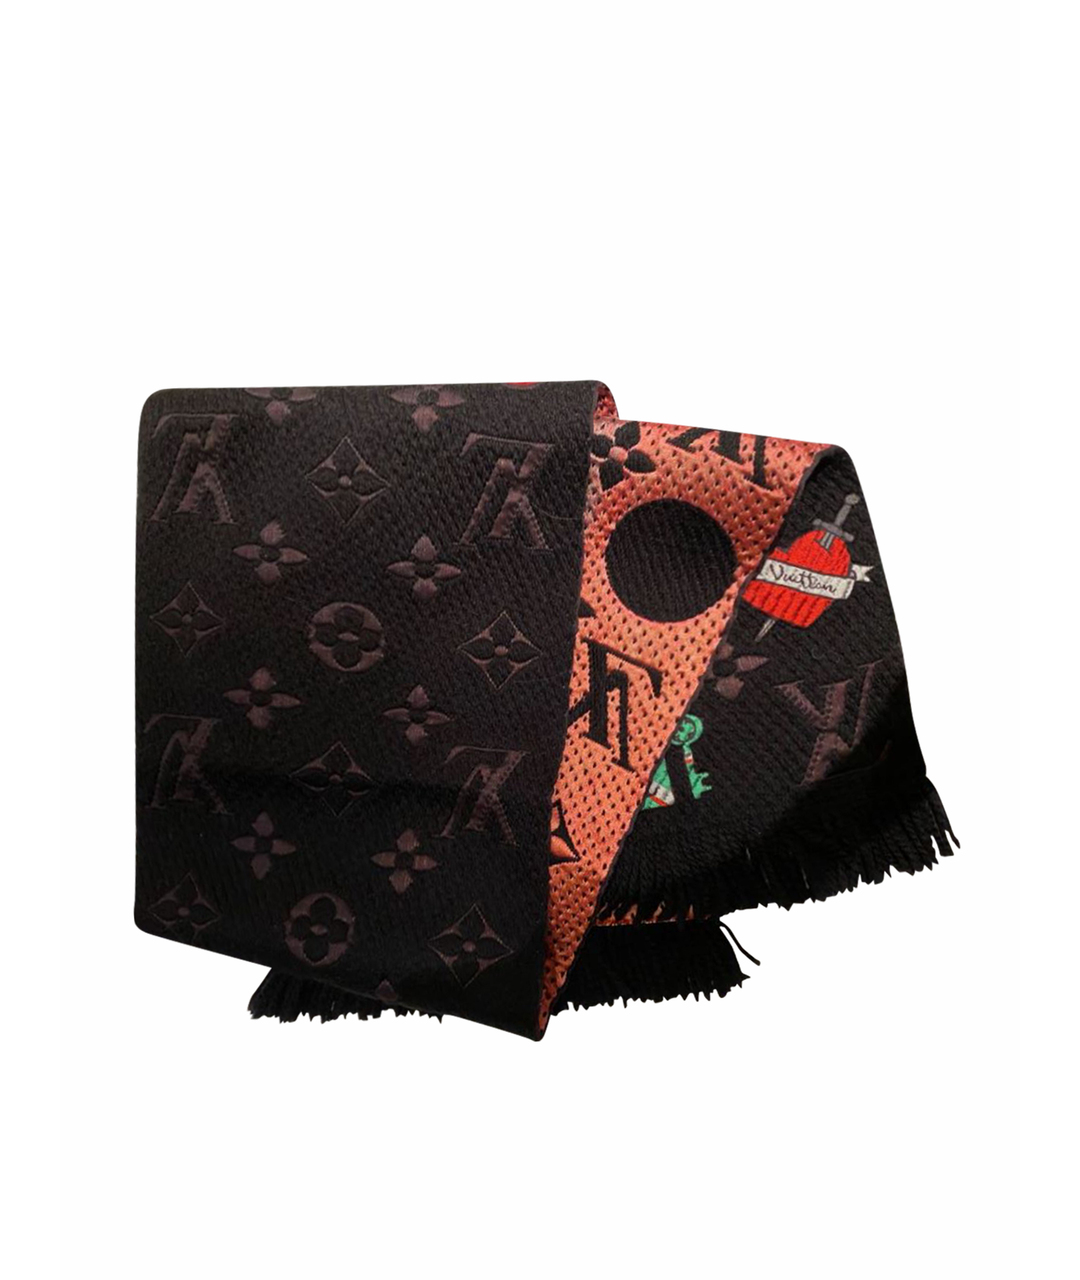 LOUIS VUITTON PRE-OWNED Мульти шерстяной шарф, фото 1